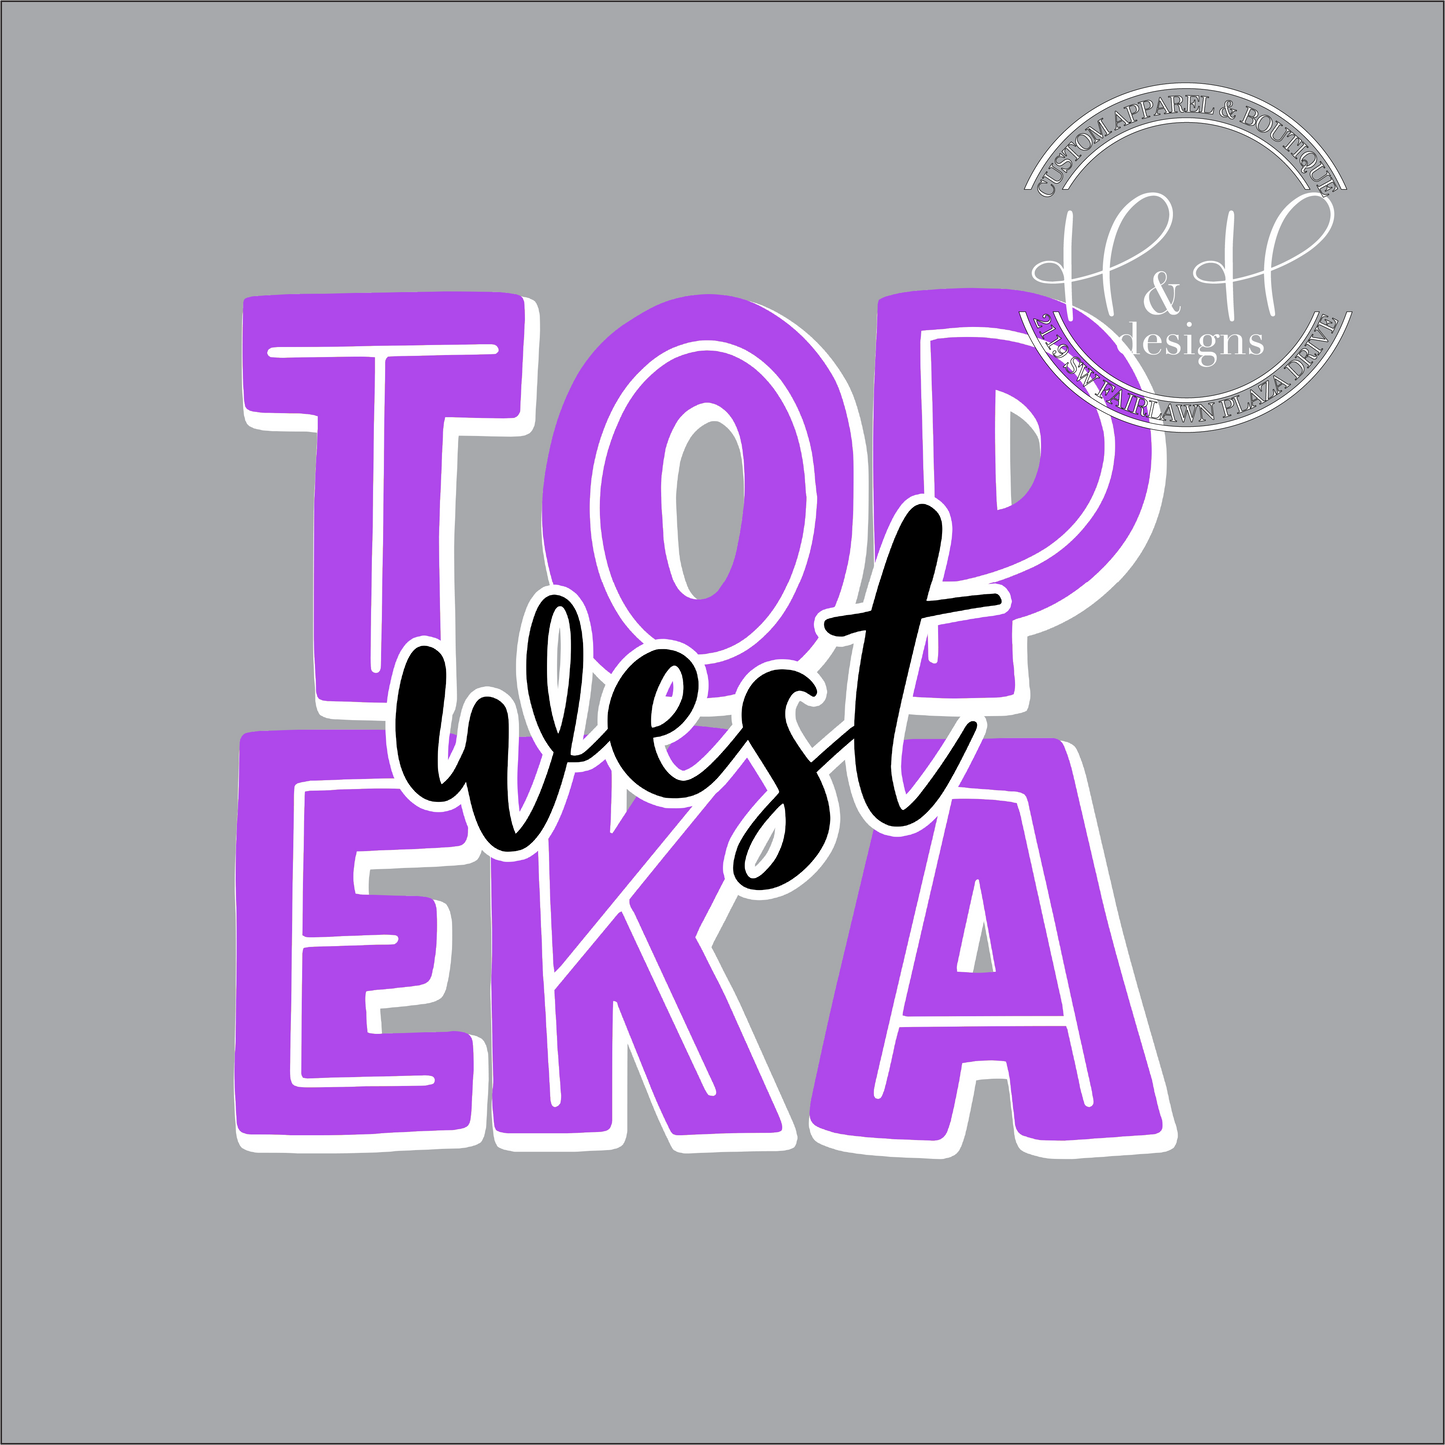 Topeka West Retro - Topeka West Official Spirit Wear!